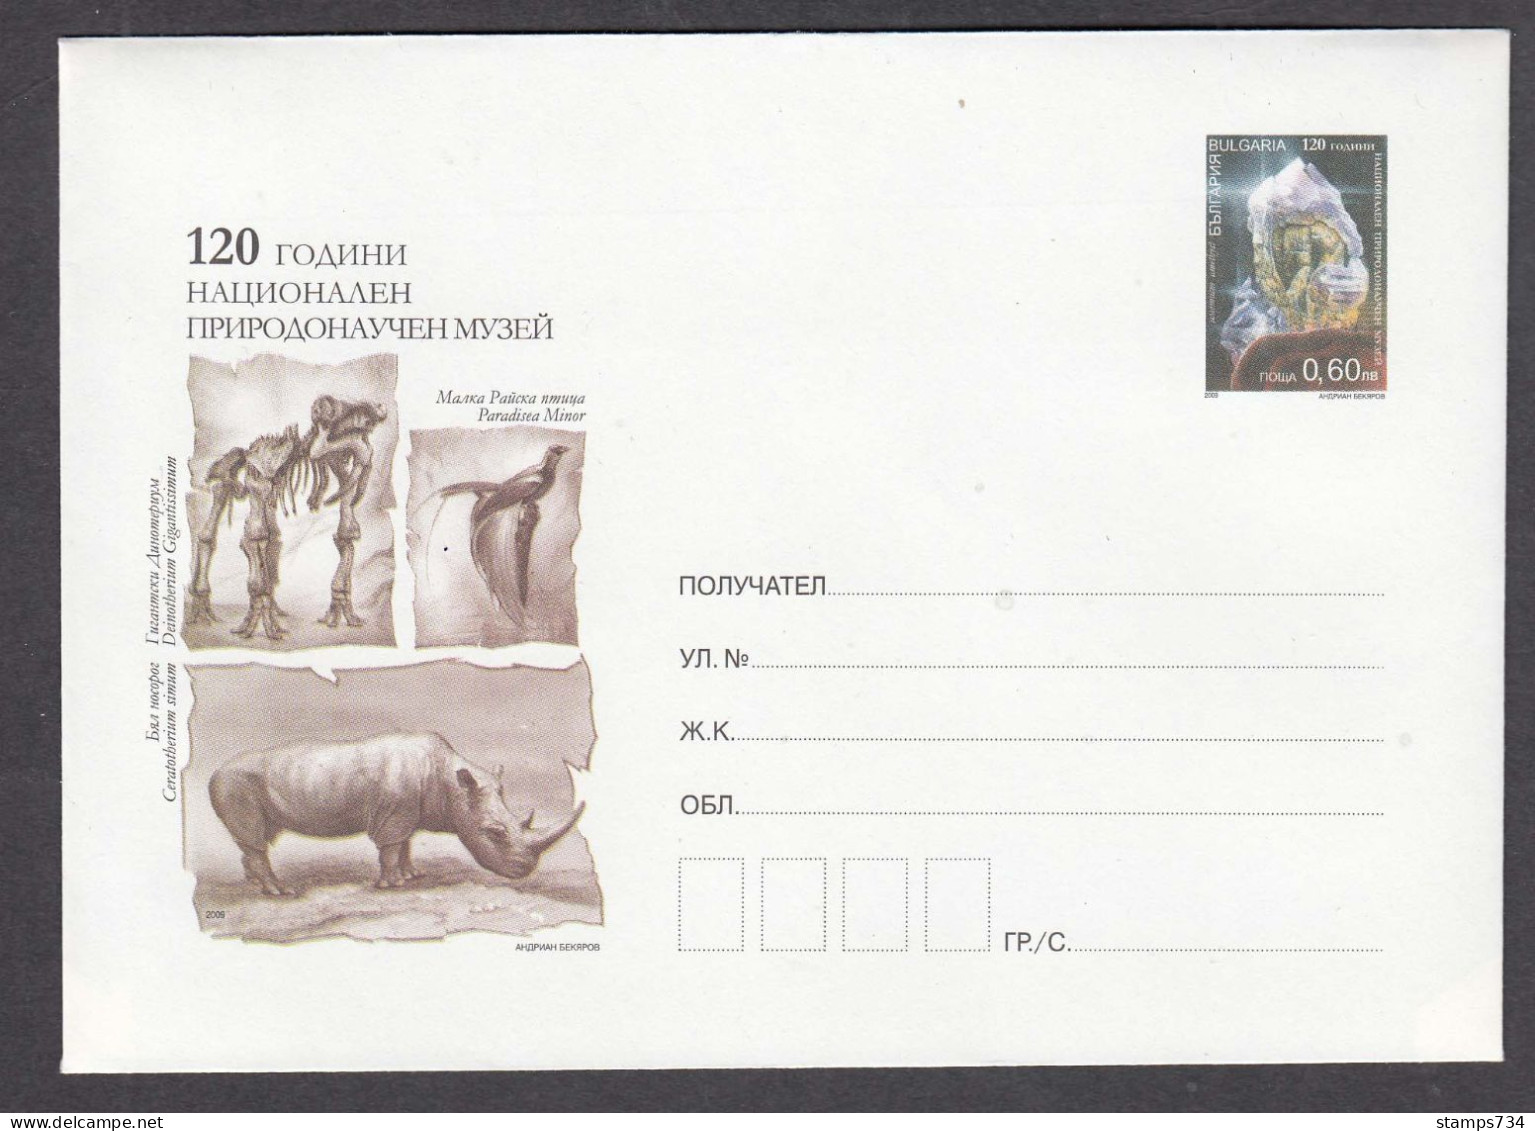 PS 1398/2009 - Mint, 120 Years Of The National Natural History Museum, Mineral, Post. Stationery - Bulgaria - Enveloppes